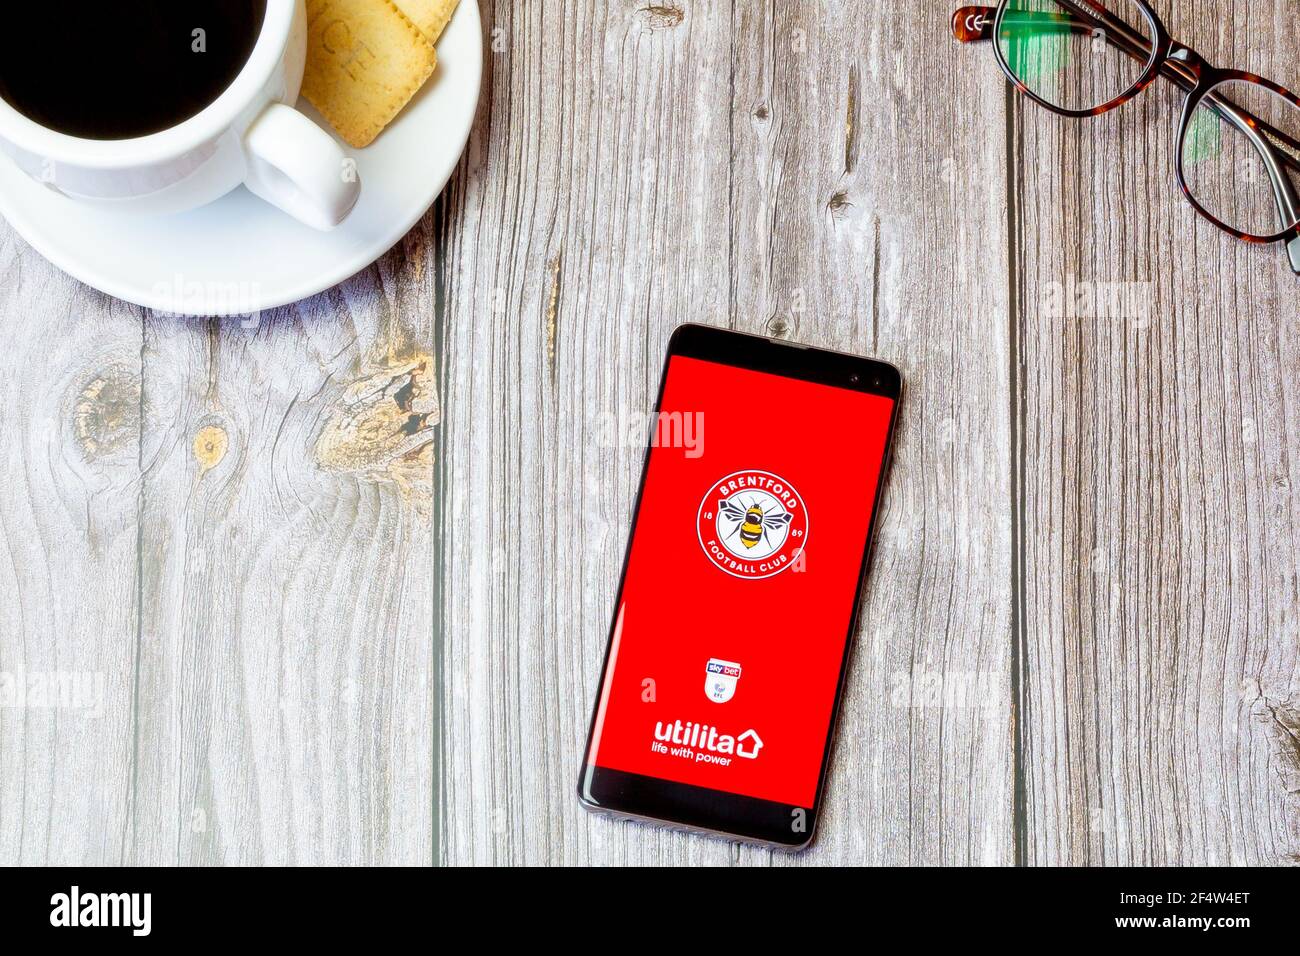 A mobile phone or cell phone laid on a wooden table with the Brentford football Club app open on screen Stock Photo